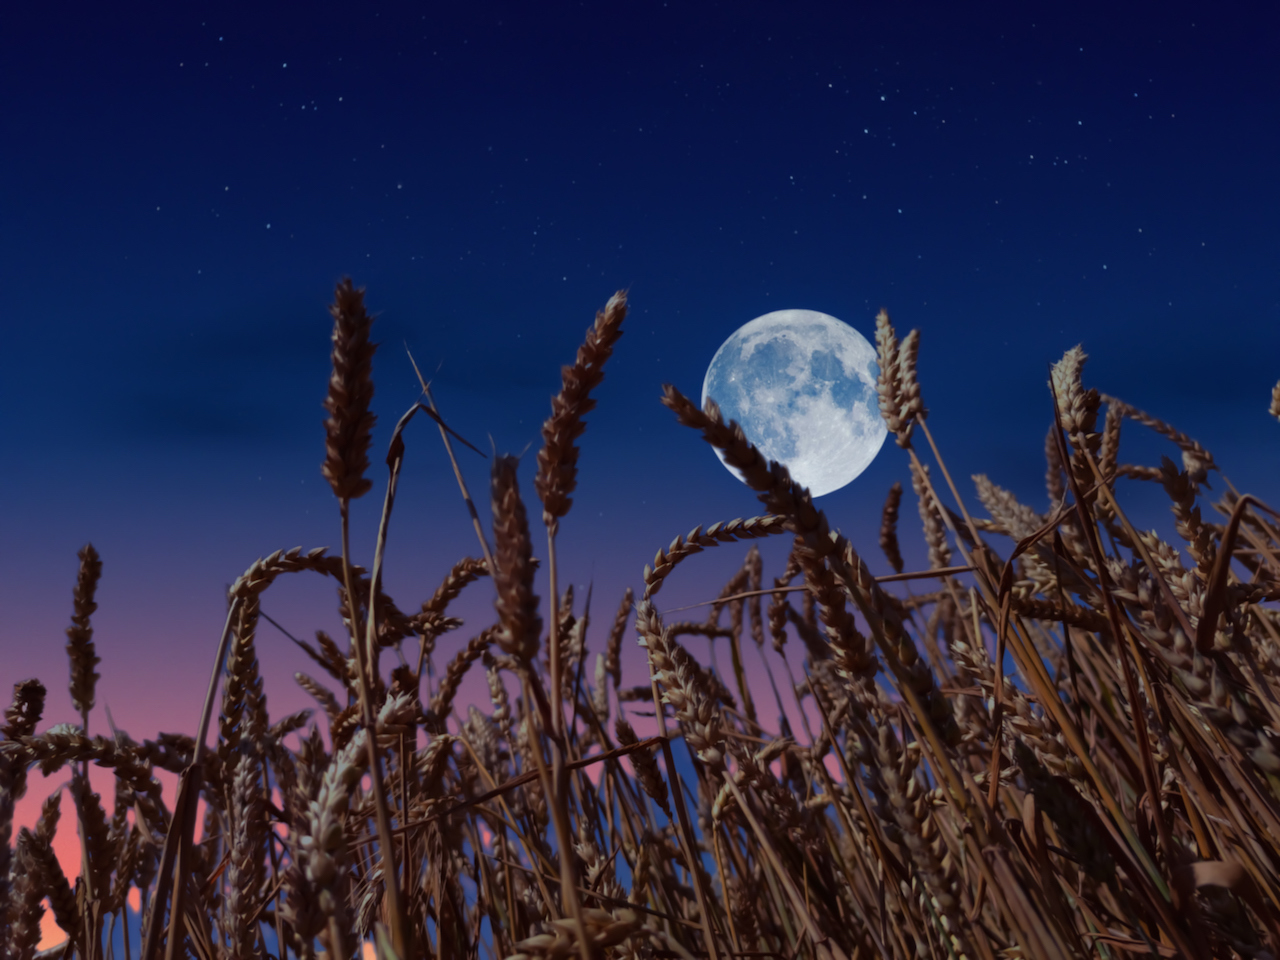 Why is September's full Moon called the Harvest Moon?